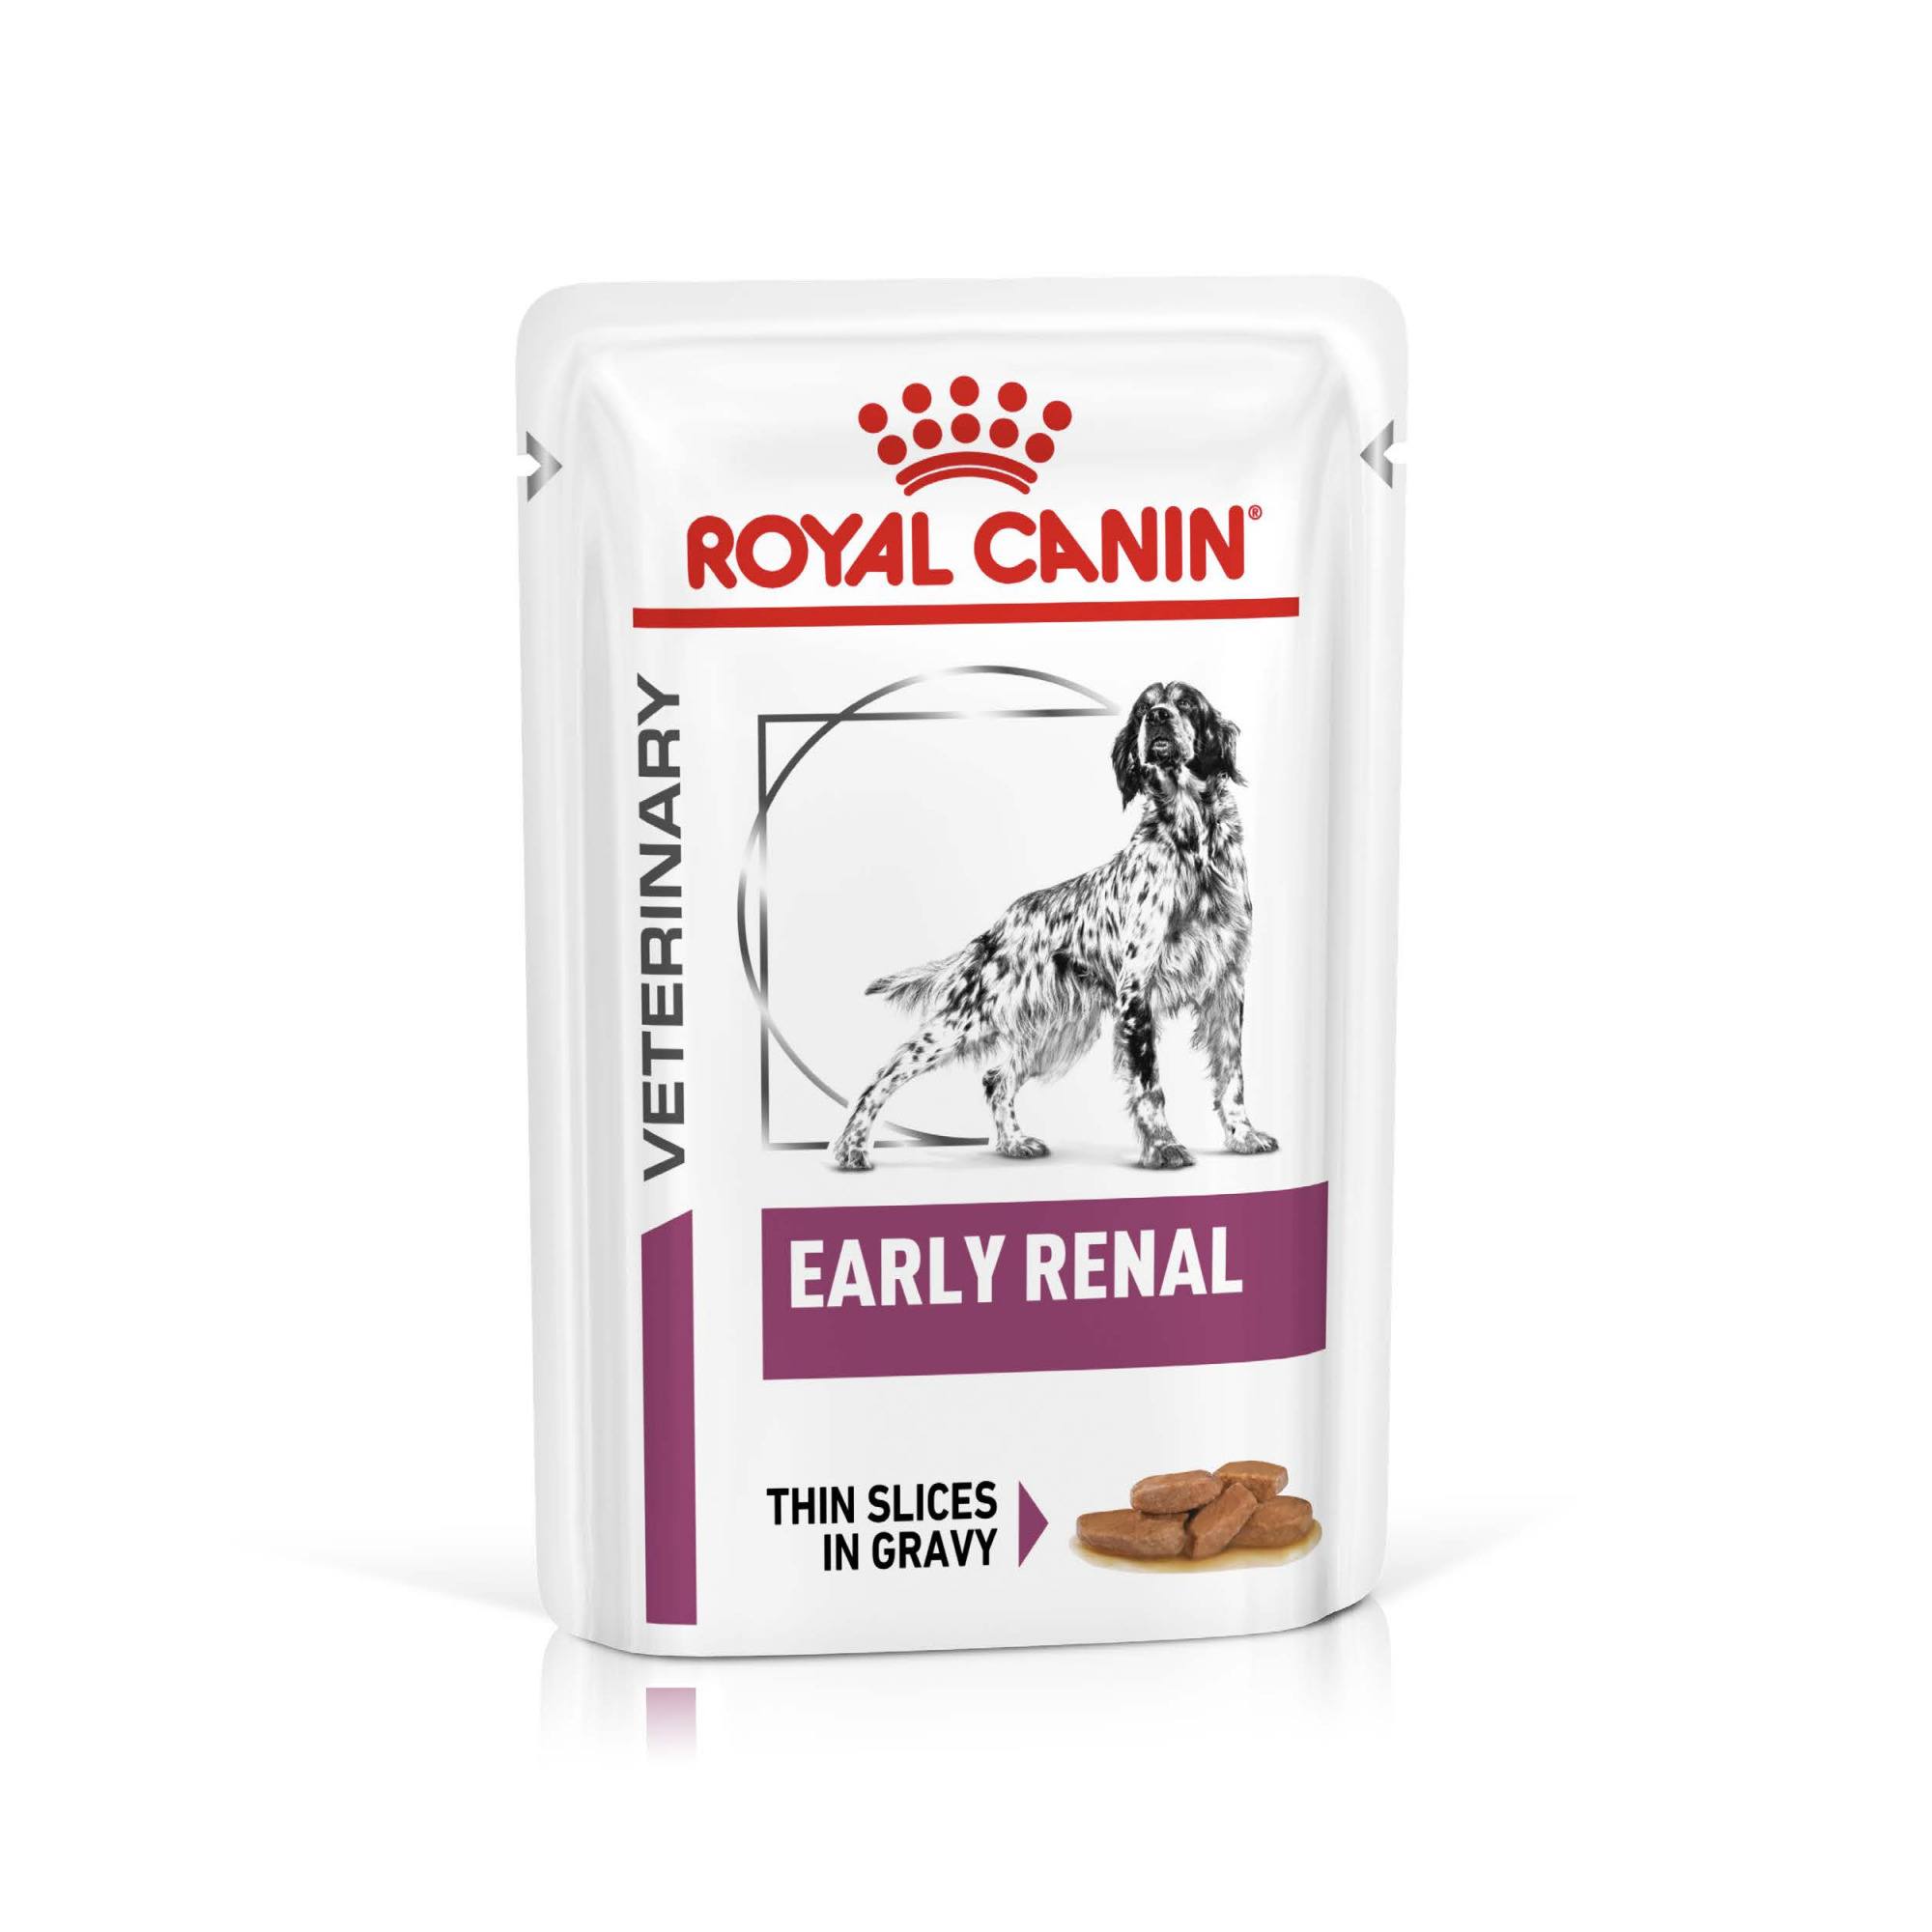 ROYAL CANIN® Early Renal Adult Wet Dog Food VioVet.co.uk